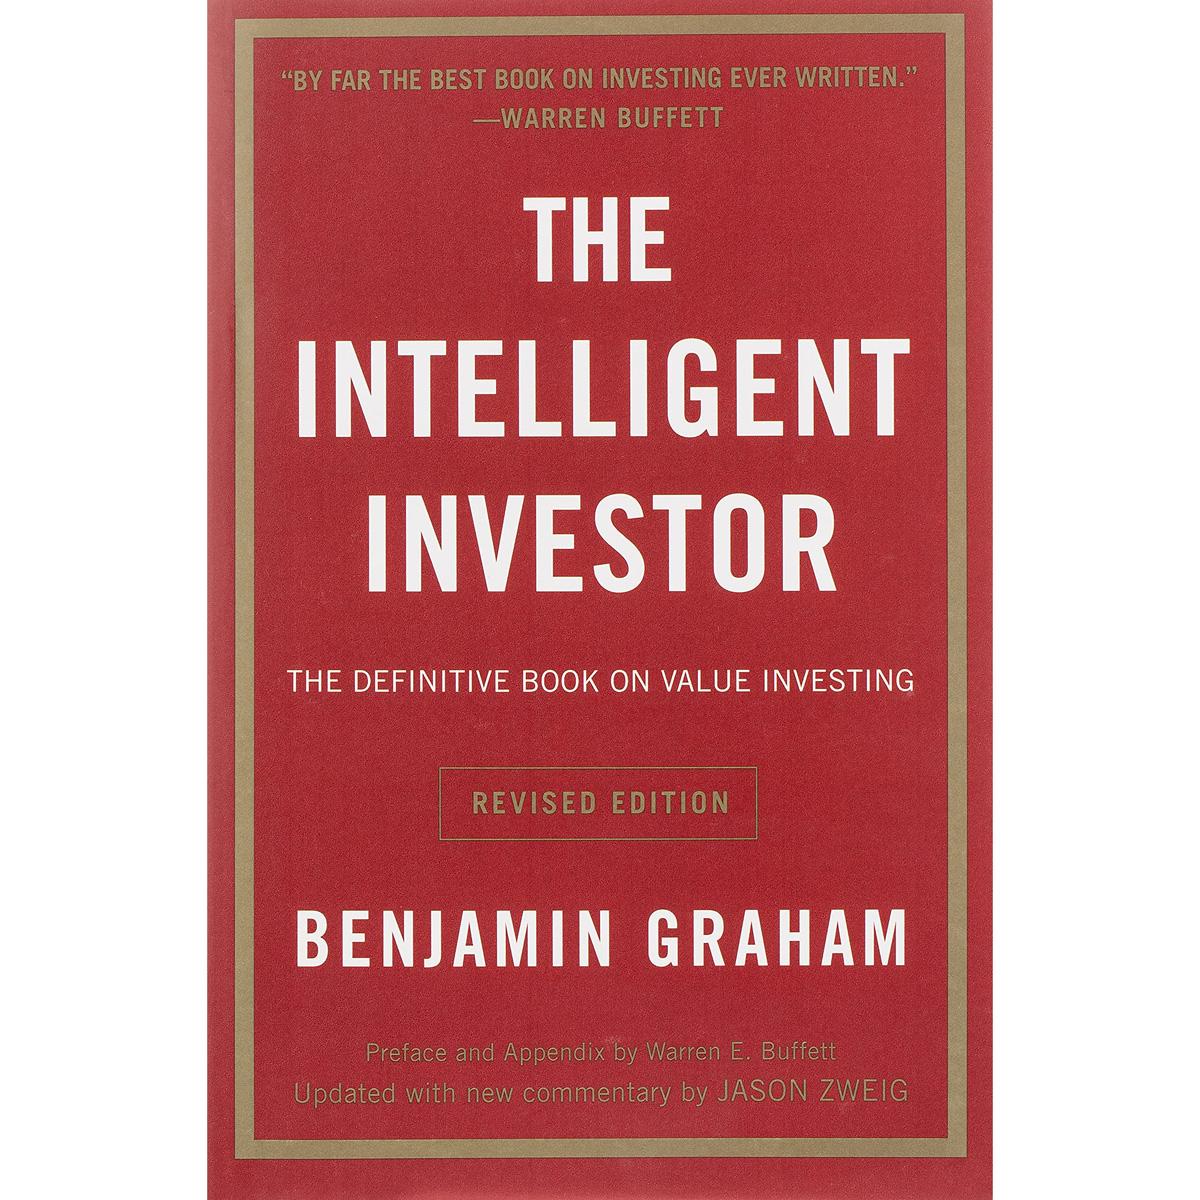 The Intelligent Investor Revised Edition eBook for $2.99